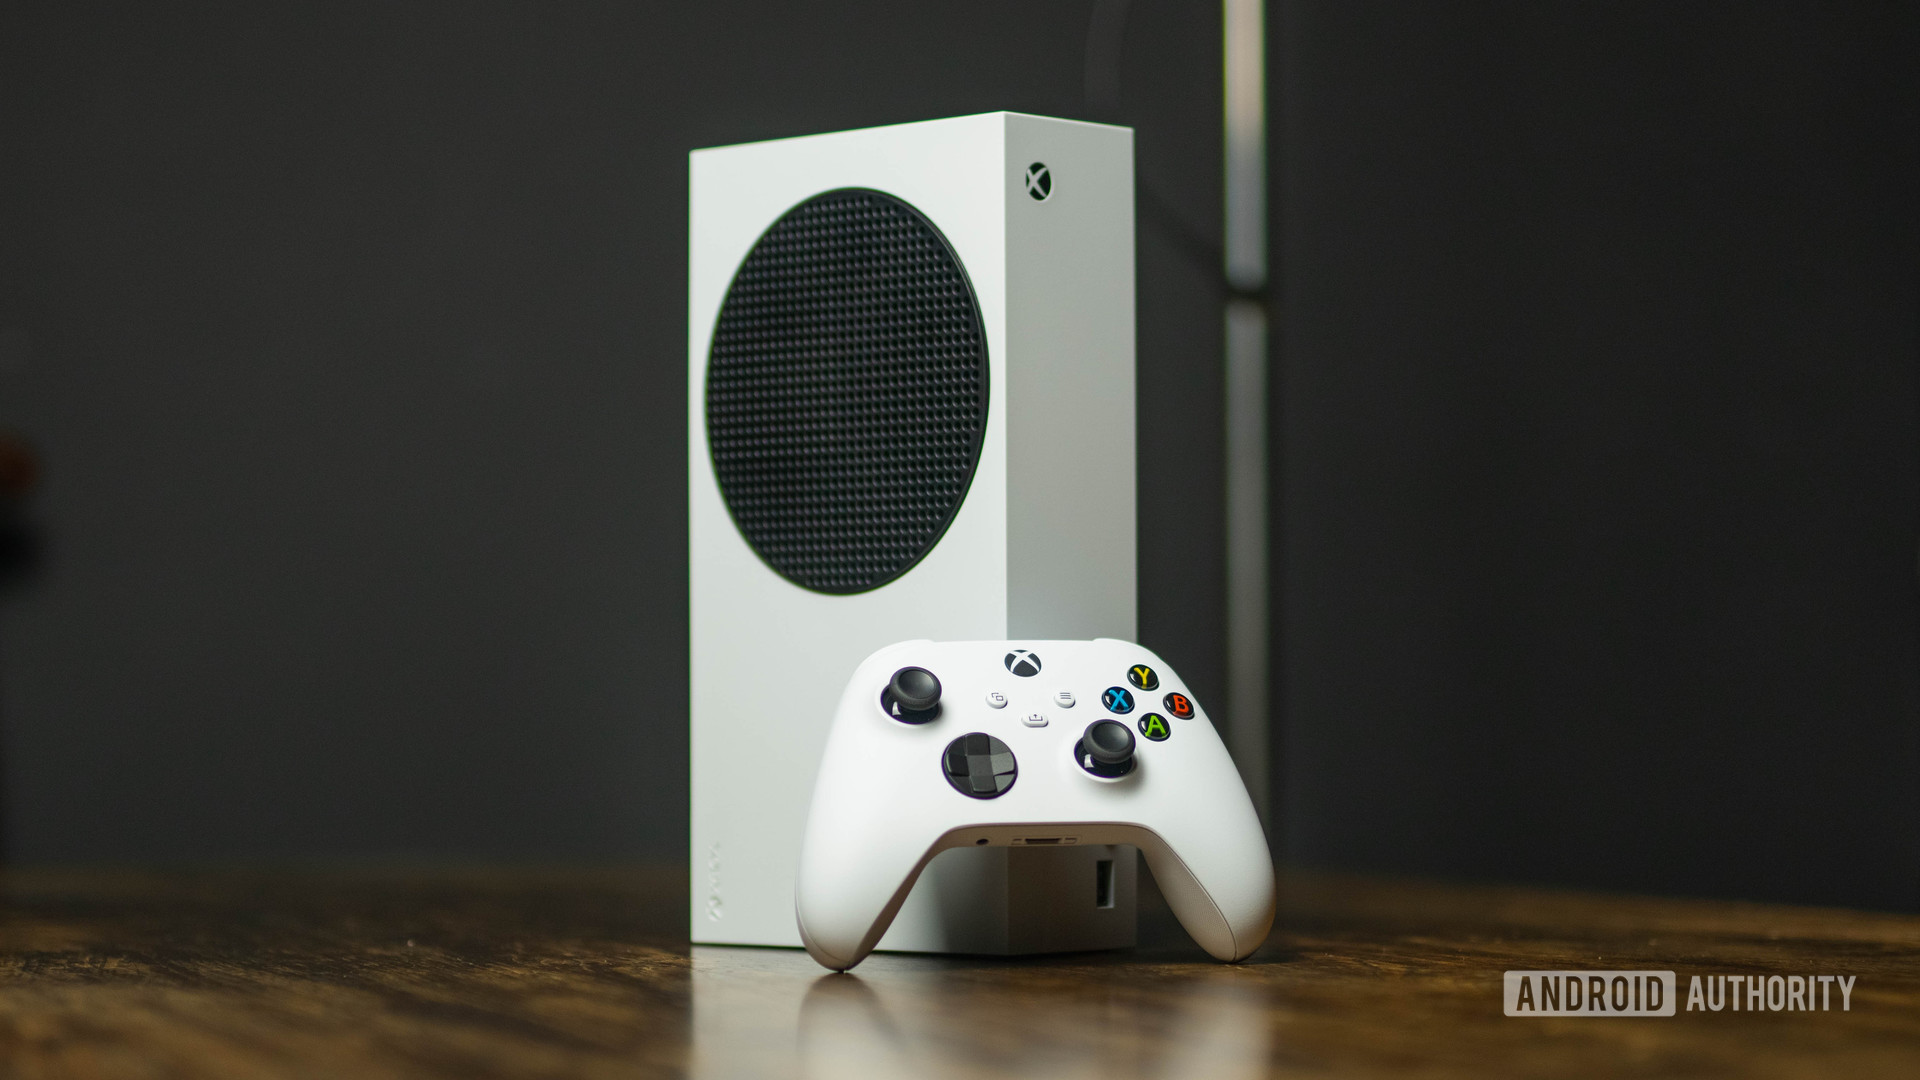 ophouden Storing koffer Xbox Series S review: Good things come in small packages